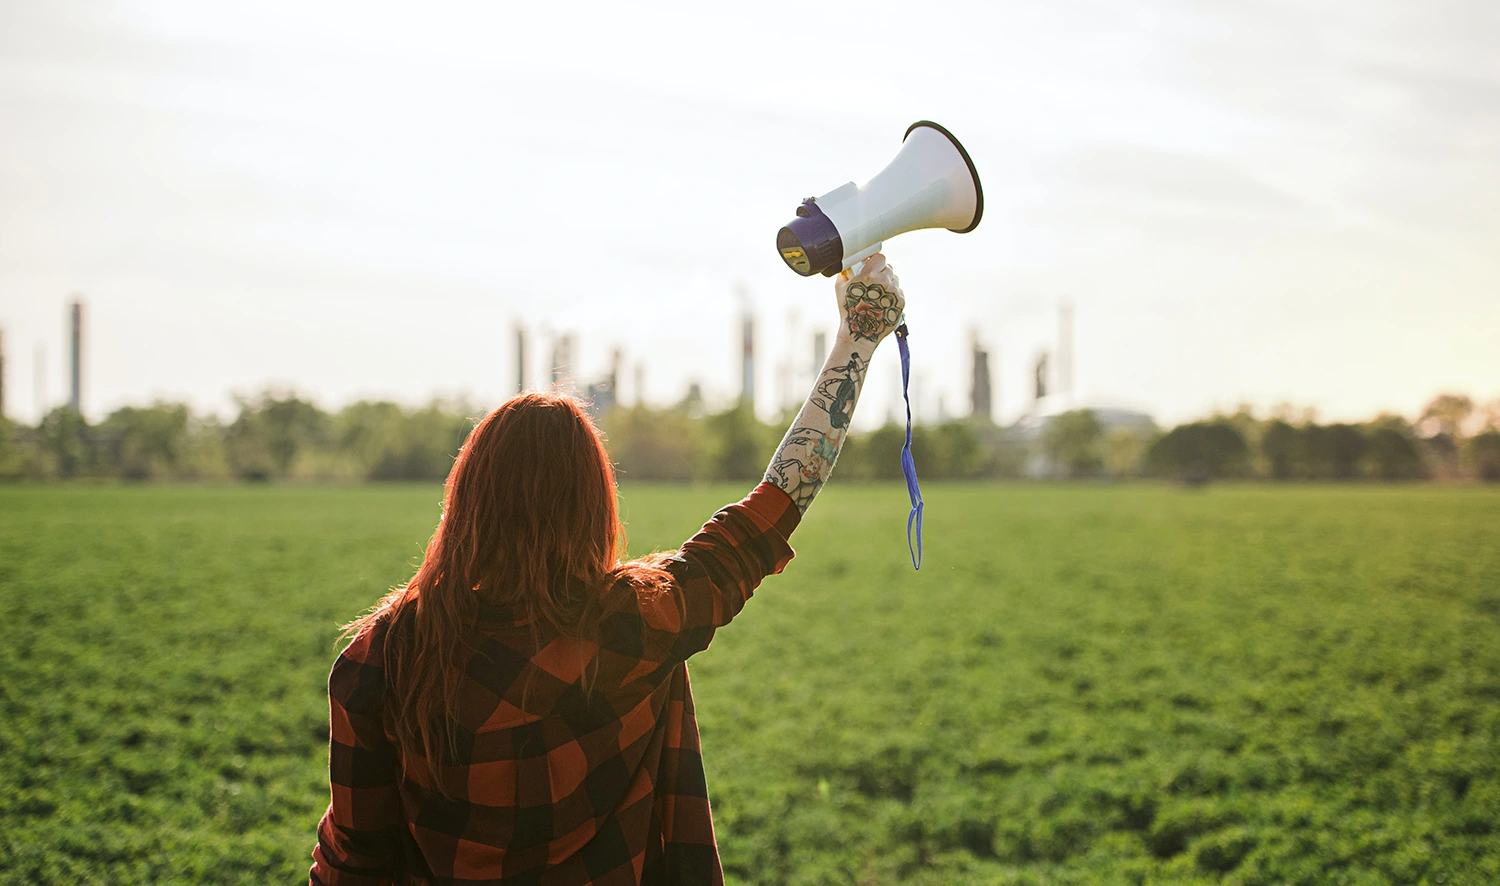 A woman holding a megaphone in a field representing the promotion of a restaurant loyalty program.